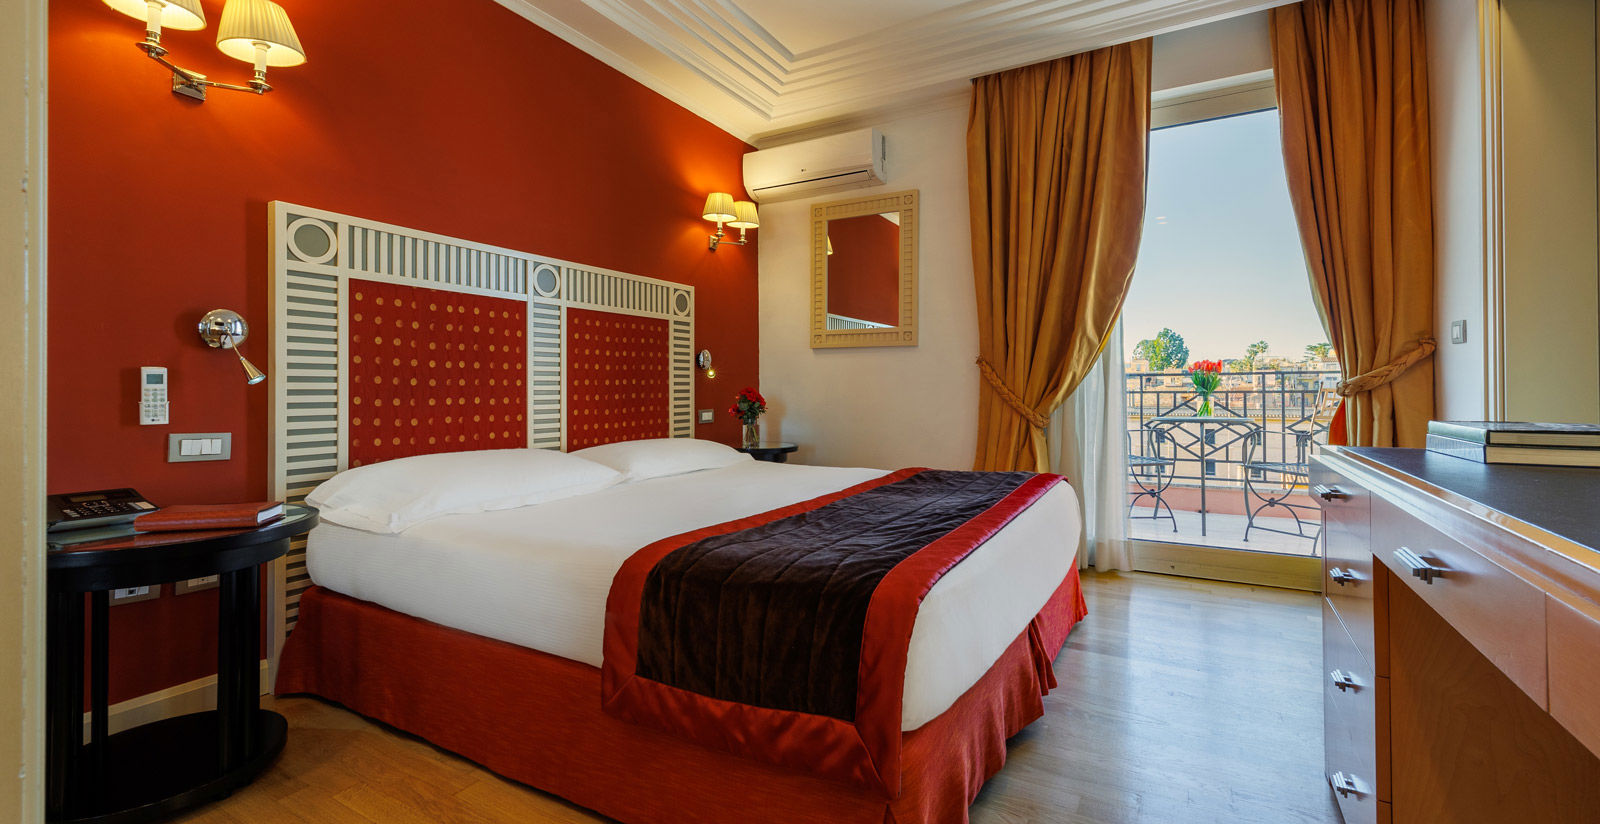 Grand Hotel Palatino - Junior Suite in Rome with Terrace Quirinale Palace and Santa Maria Maggiore view 1